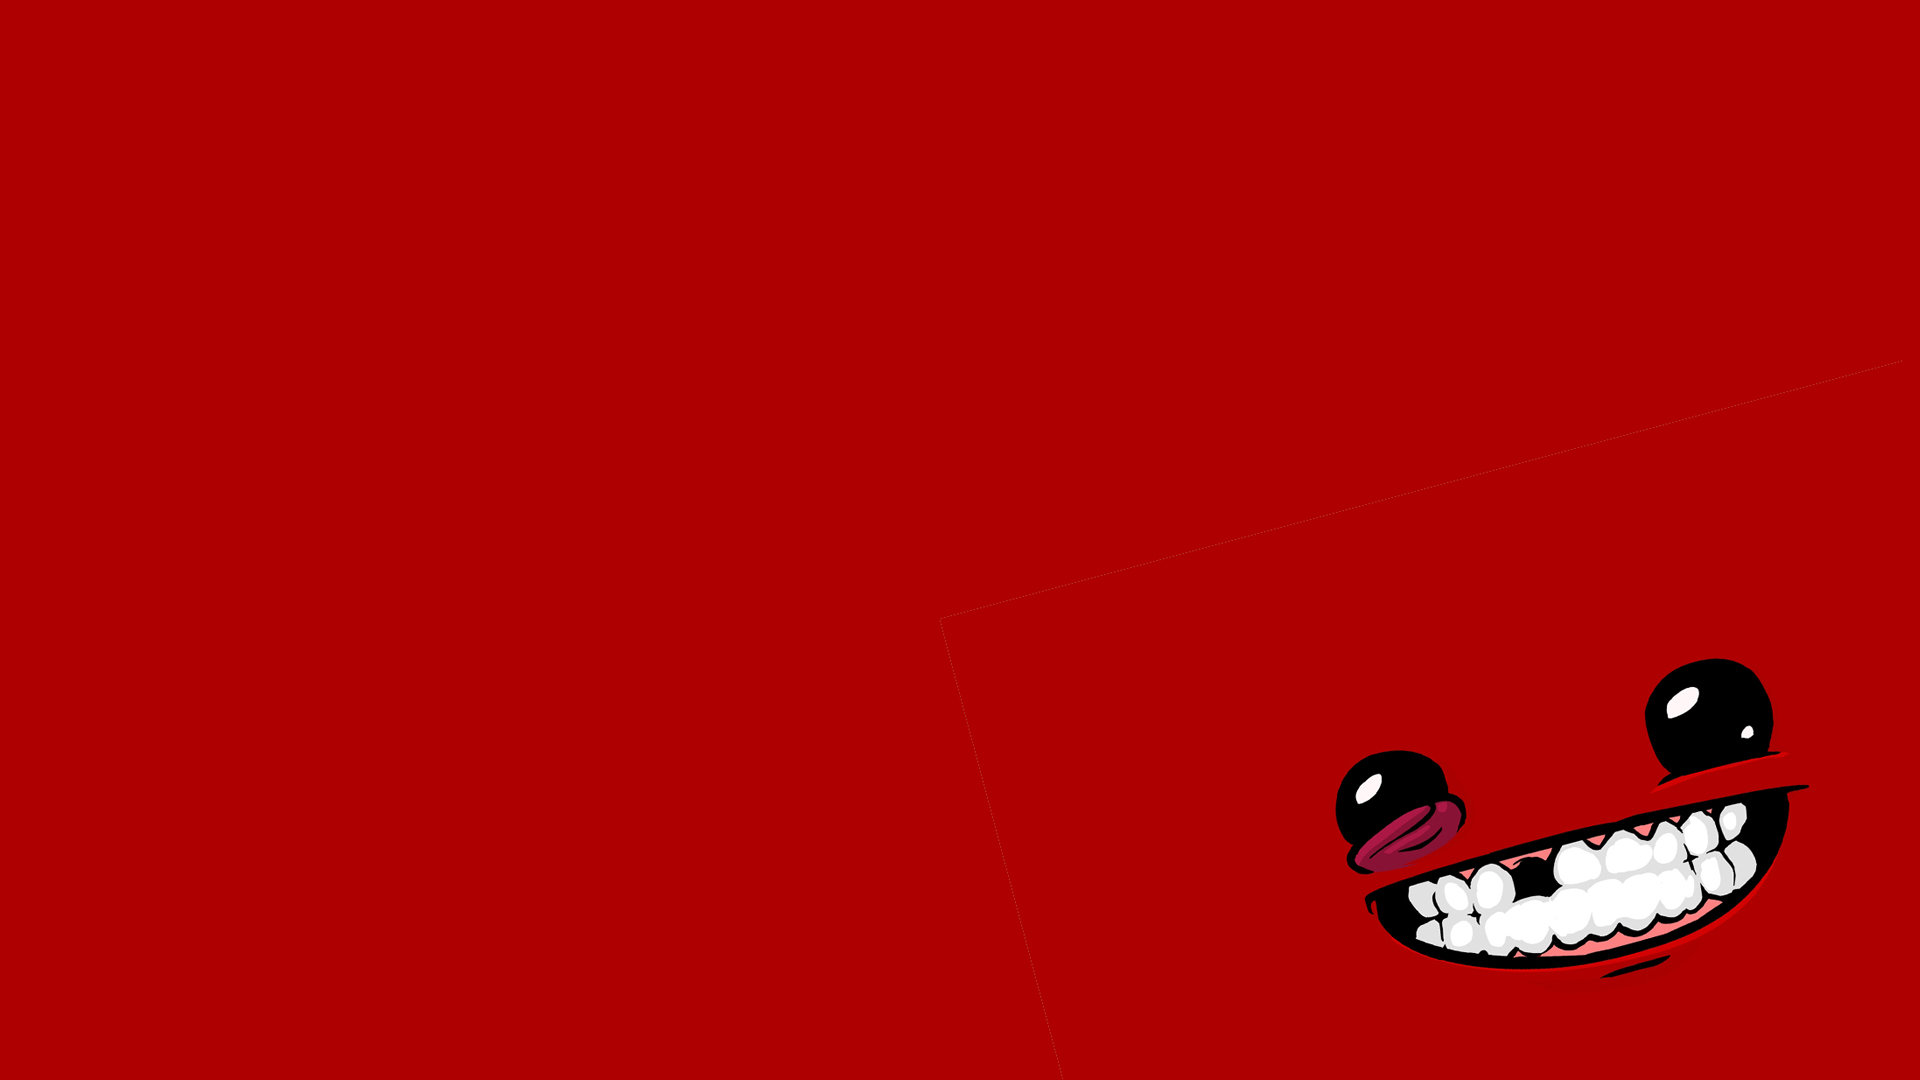 Download full hd 1920x1080 Super Meat Boy PC background ID:69165 for free